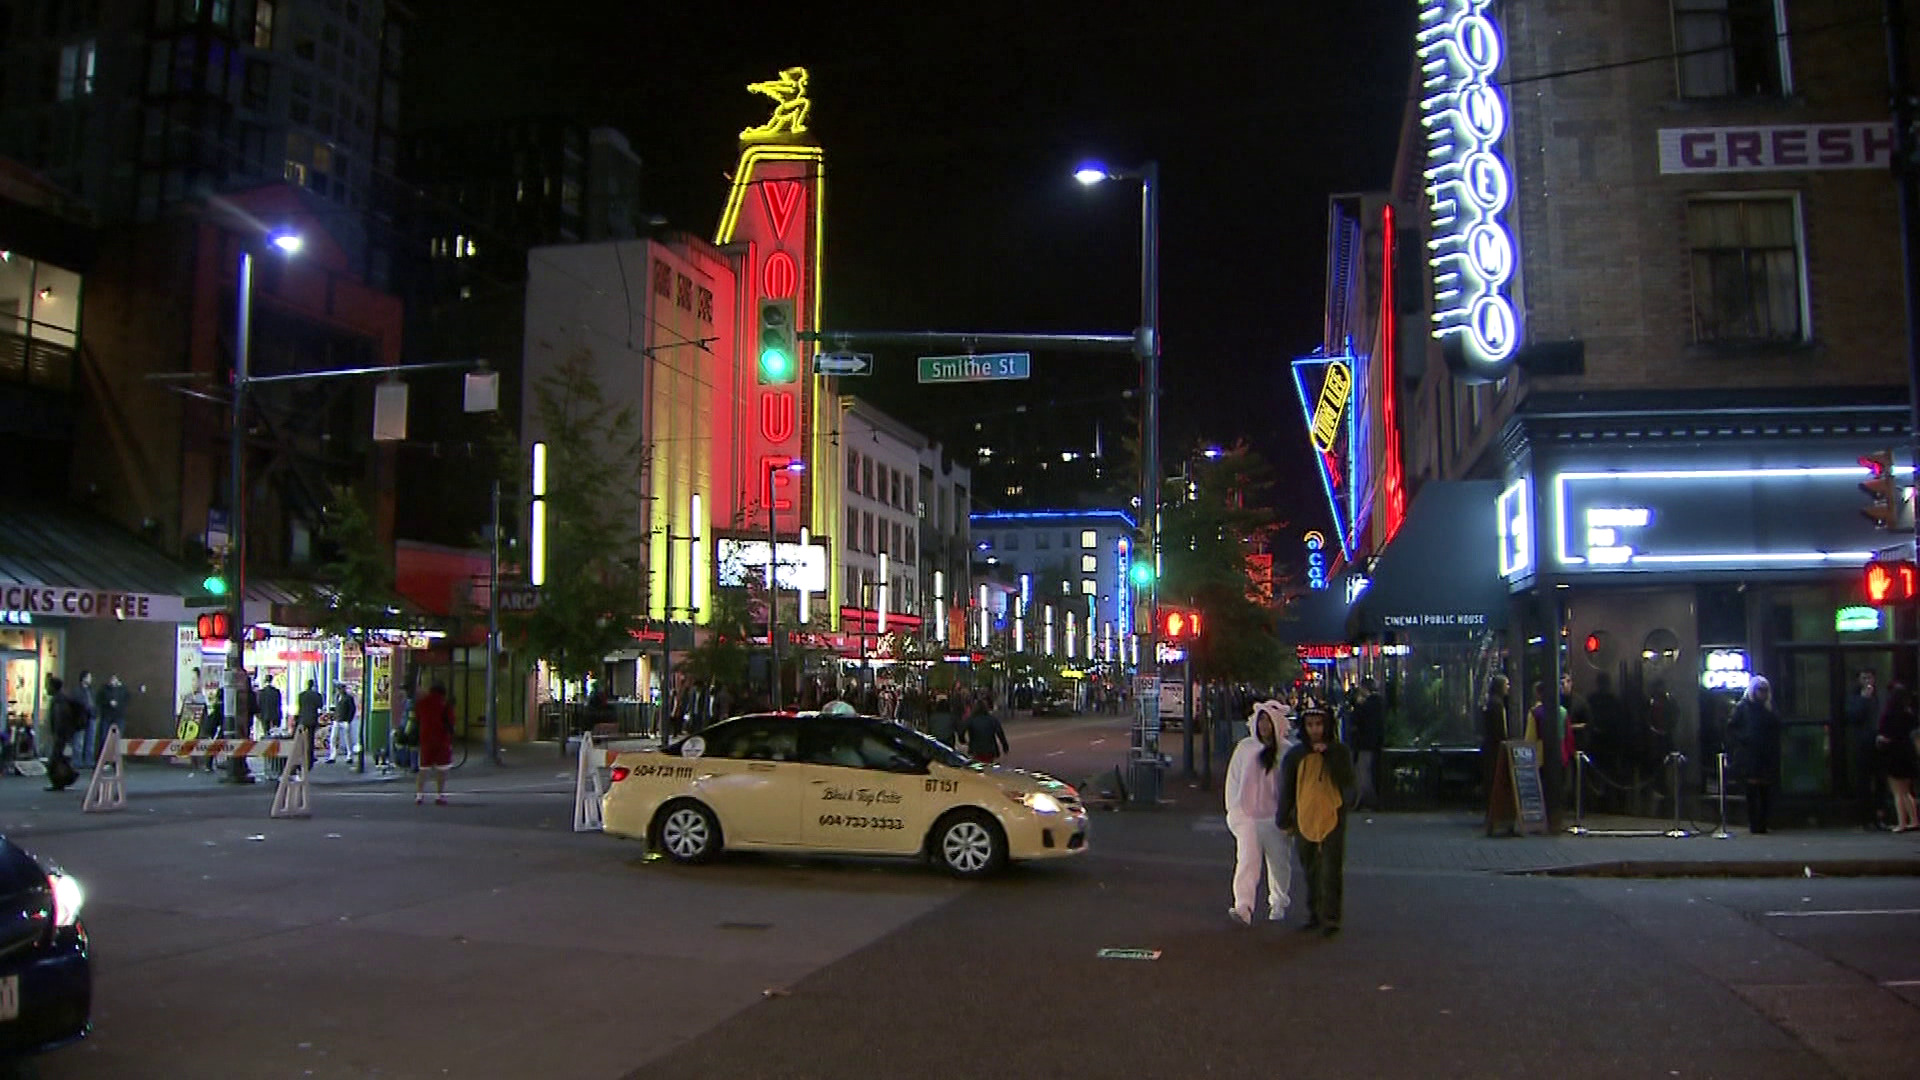 Groping ban doubled for barwatch-participating nightclubs in Vancouver